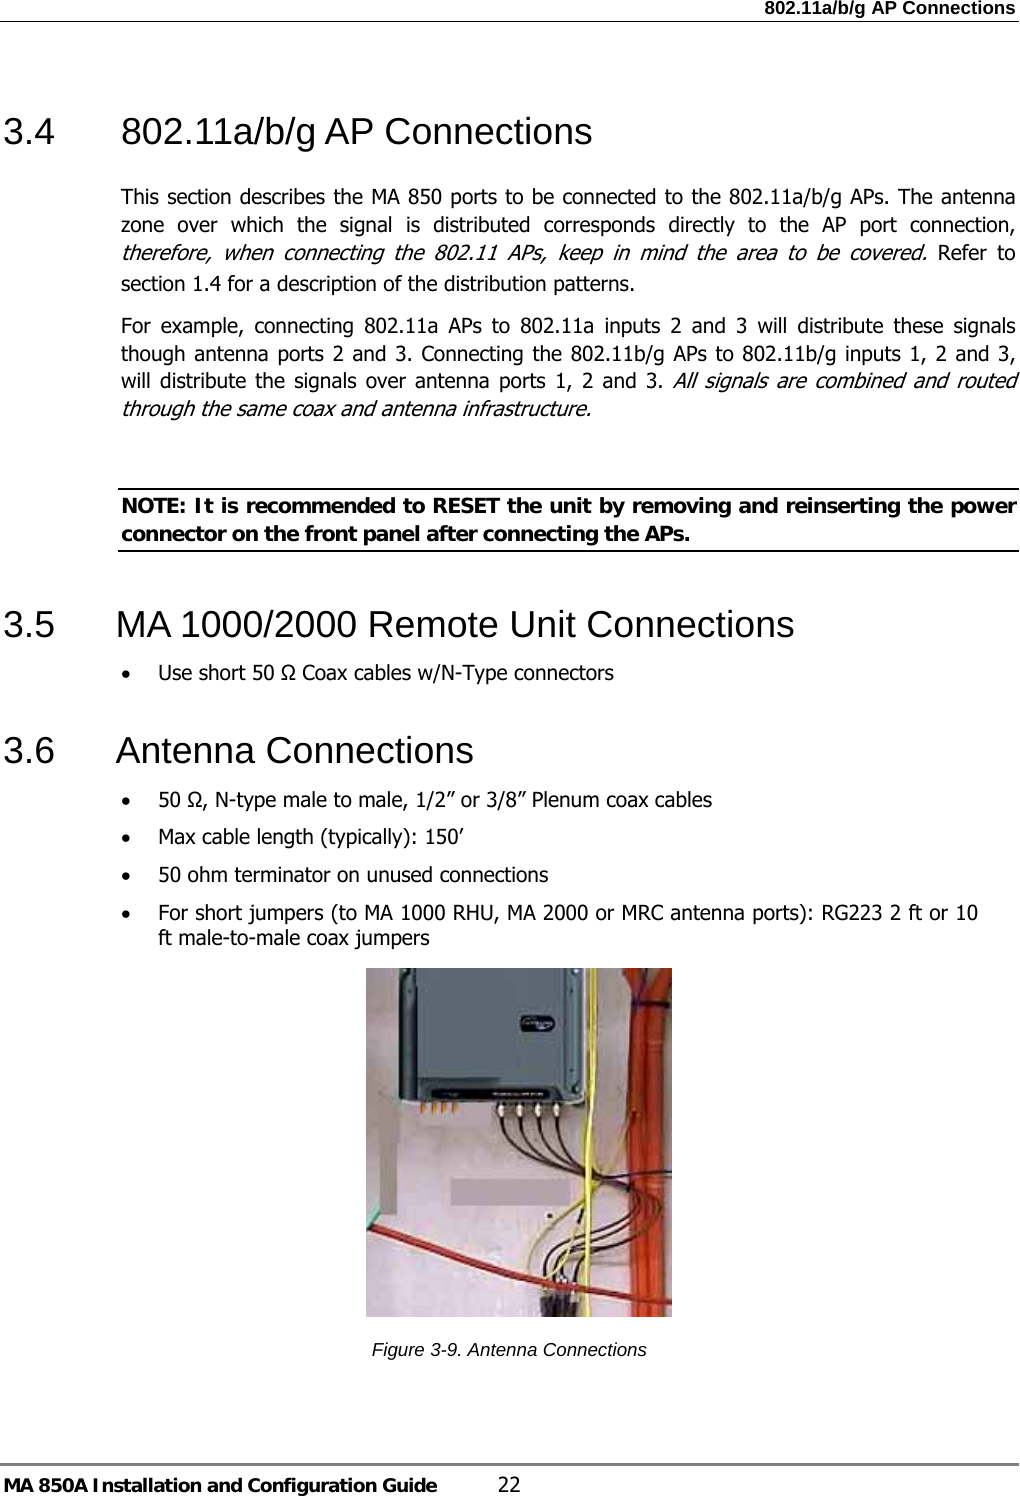 802.11a/b/g AP Connections MA 850A Installation and Configuration Guide  22 3.4 802.11a/b/g AP Connections This section describes the MA 850 ports to be connected to the 802.11a/b/g APs. The antenna zone over which the signal is distributed corresponds directly to the AP port connection, therefore, when connecting the 802.11 APs, keep in mind the area to be covered. Refer to section  1.4 for a description of the distribution patterns. For example, connecting 802.11a APs to 802.11a inputs 2 and 3 will distribute these signals though antenna ports 2 and 3. Connecting the 802.11b/g APs to 802.11b/g inputs 1, 2 and 3, will distribute the signals over antenna ports 1, 2 and 3. All signals are combined and routed through the same coax and antenna infrastructure.   NOTE: It is recommended to RESET the unit by removing and reinserting the power connector on the front panel after connecting the APs.  3.5  MA 1000/2000 Remote Unit Connections • Use short 50 Ω Coax cables w/N-Type connectors 3.6 Antenna Connections • 50 Ω, N-type male to male, 1/2” or 3/8” Plenum coax cables • Max cable length (typically): 150’ • 50 ohm terminator on unused connections • For short jumpers (to MA 1000 RHU, MA 2000 or MRC antenna ports): RG223 2 ft or 10 ft male-to-male coax jumpers      Figure  3-9. Antenna Connections  